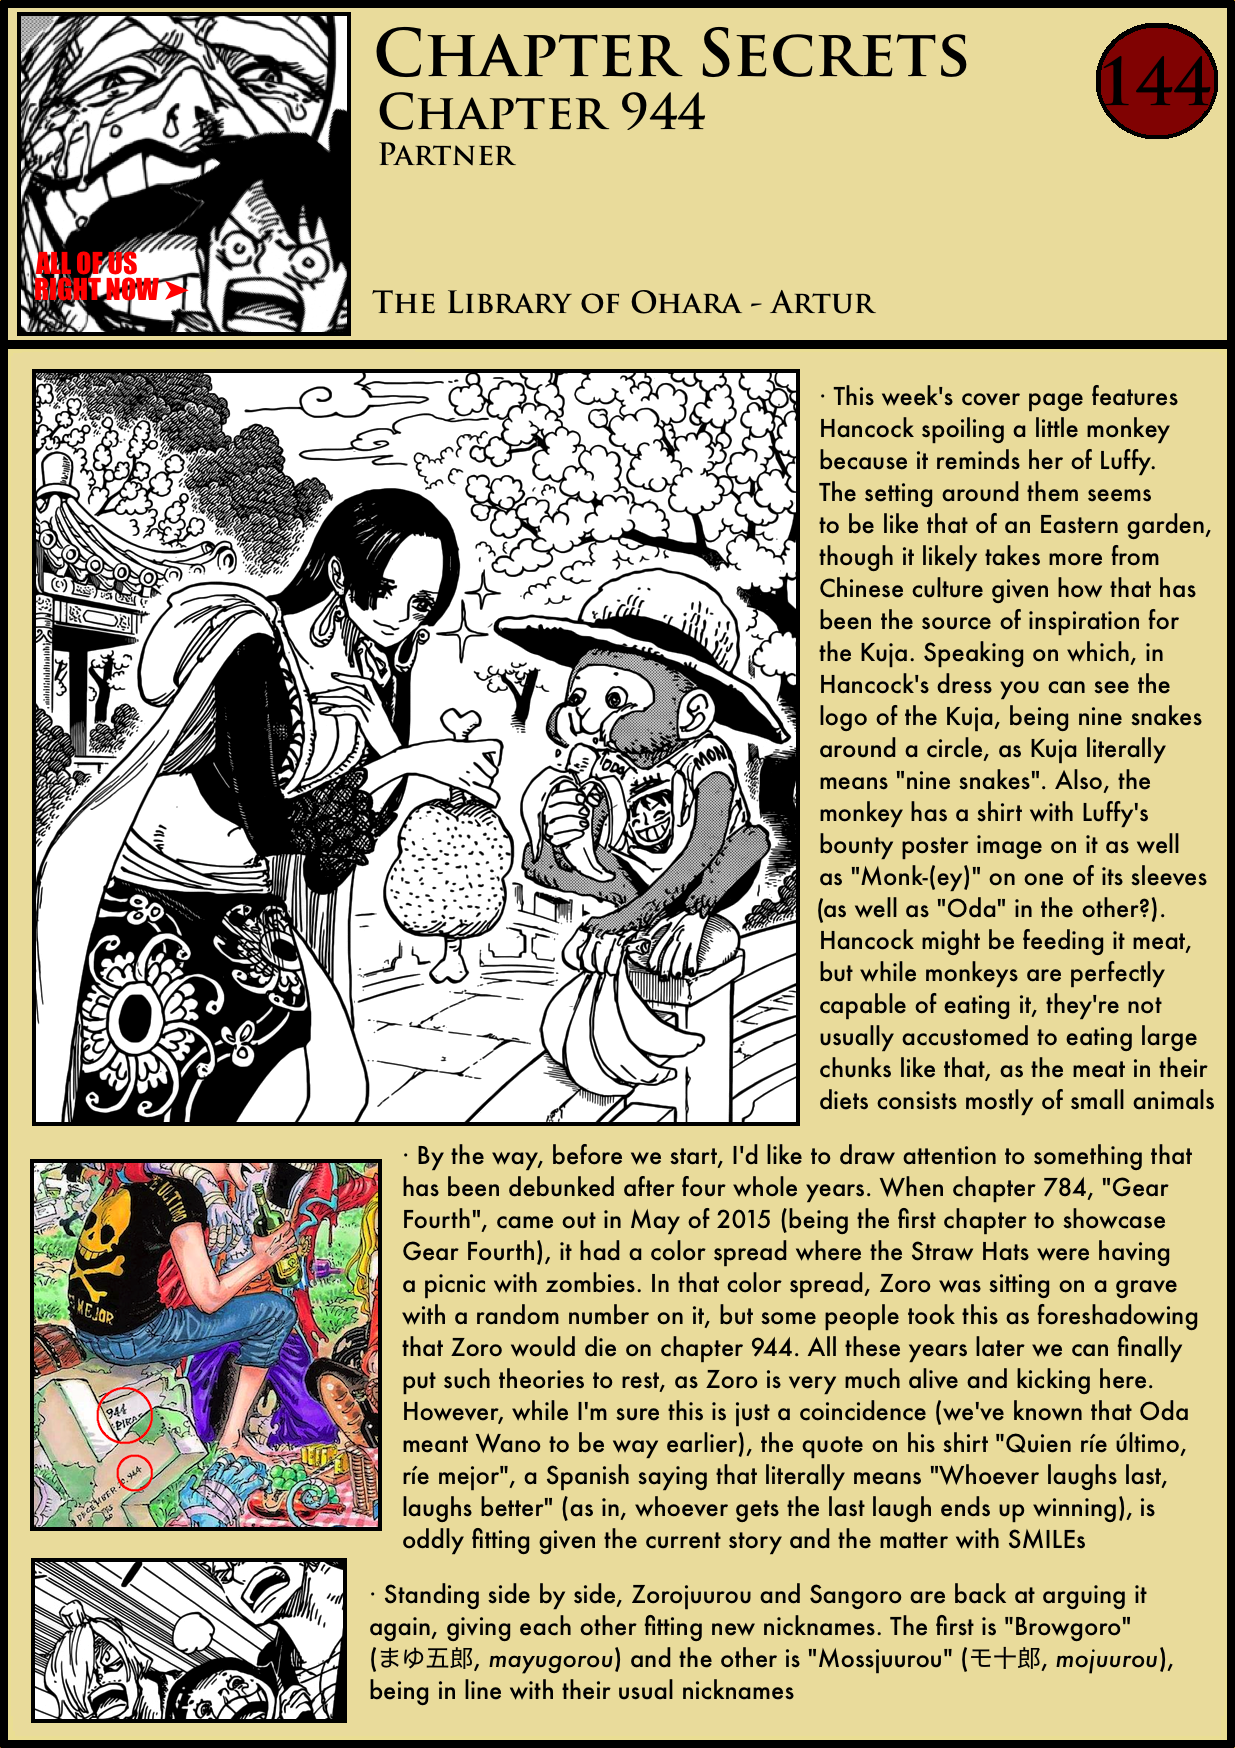 Chapter Secrets Chapter 944 In Depth Analysis The Library Of Ohara